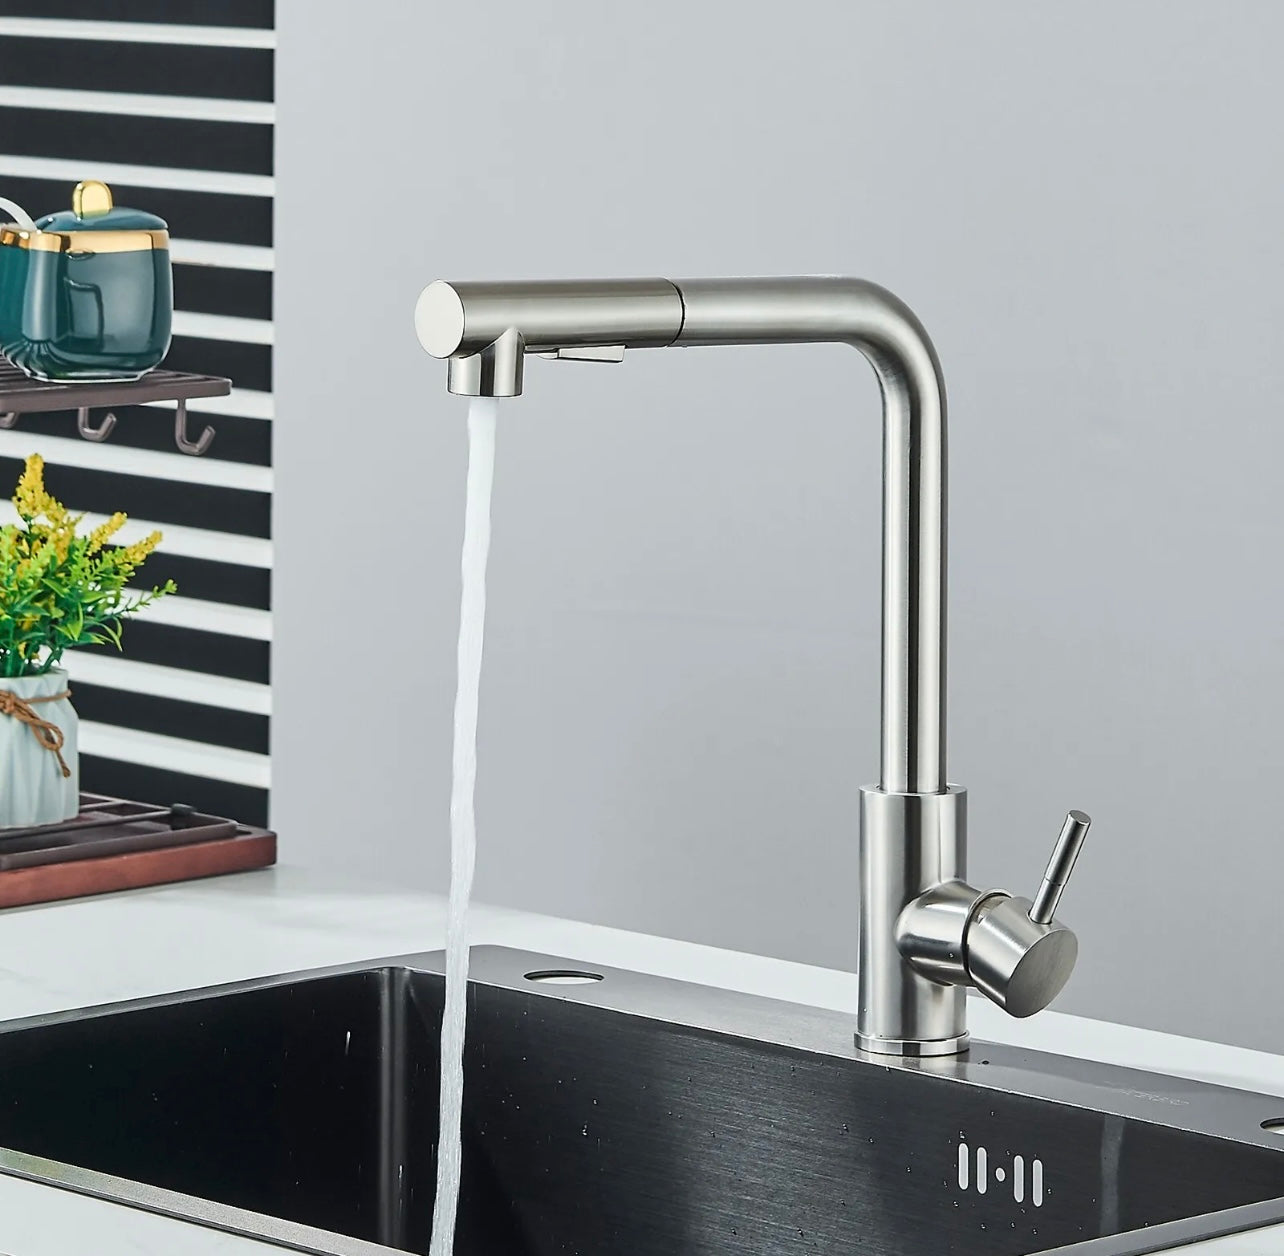 Brushed nickel pull out kitchen faucet